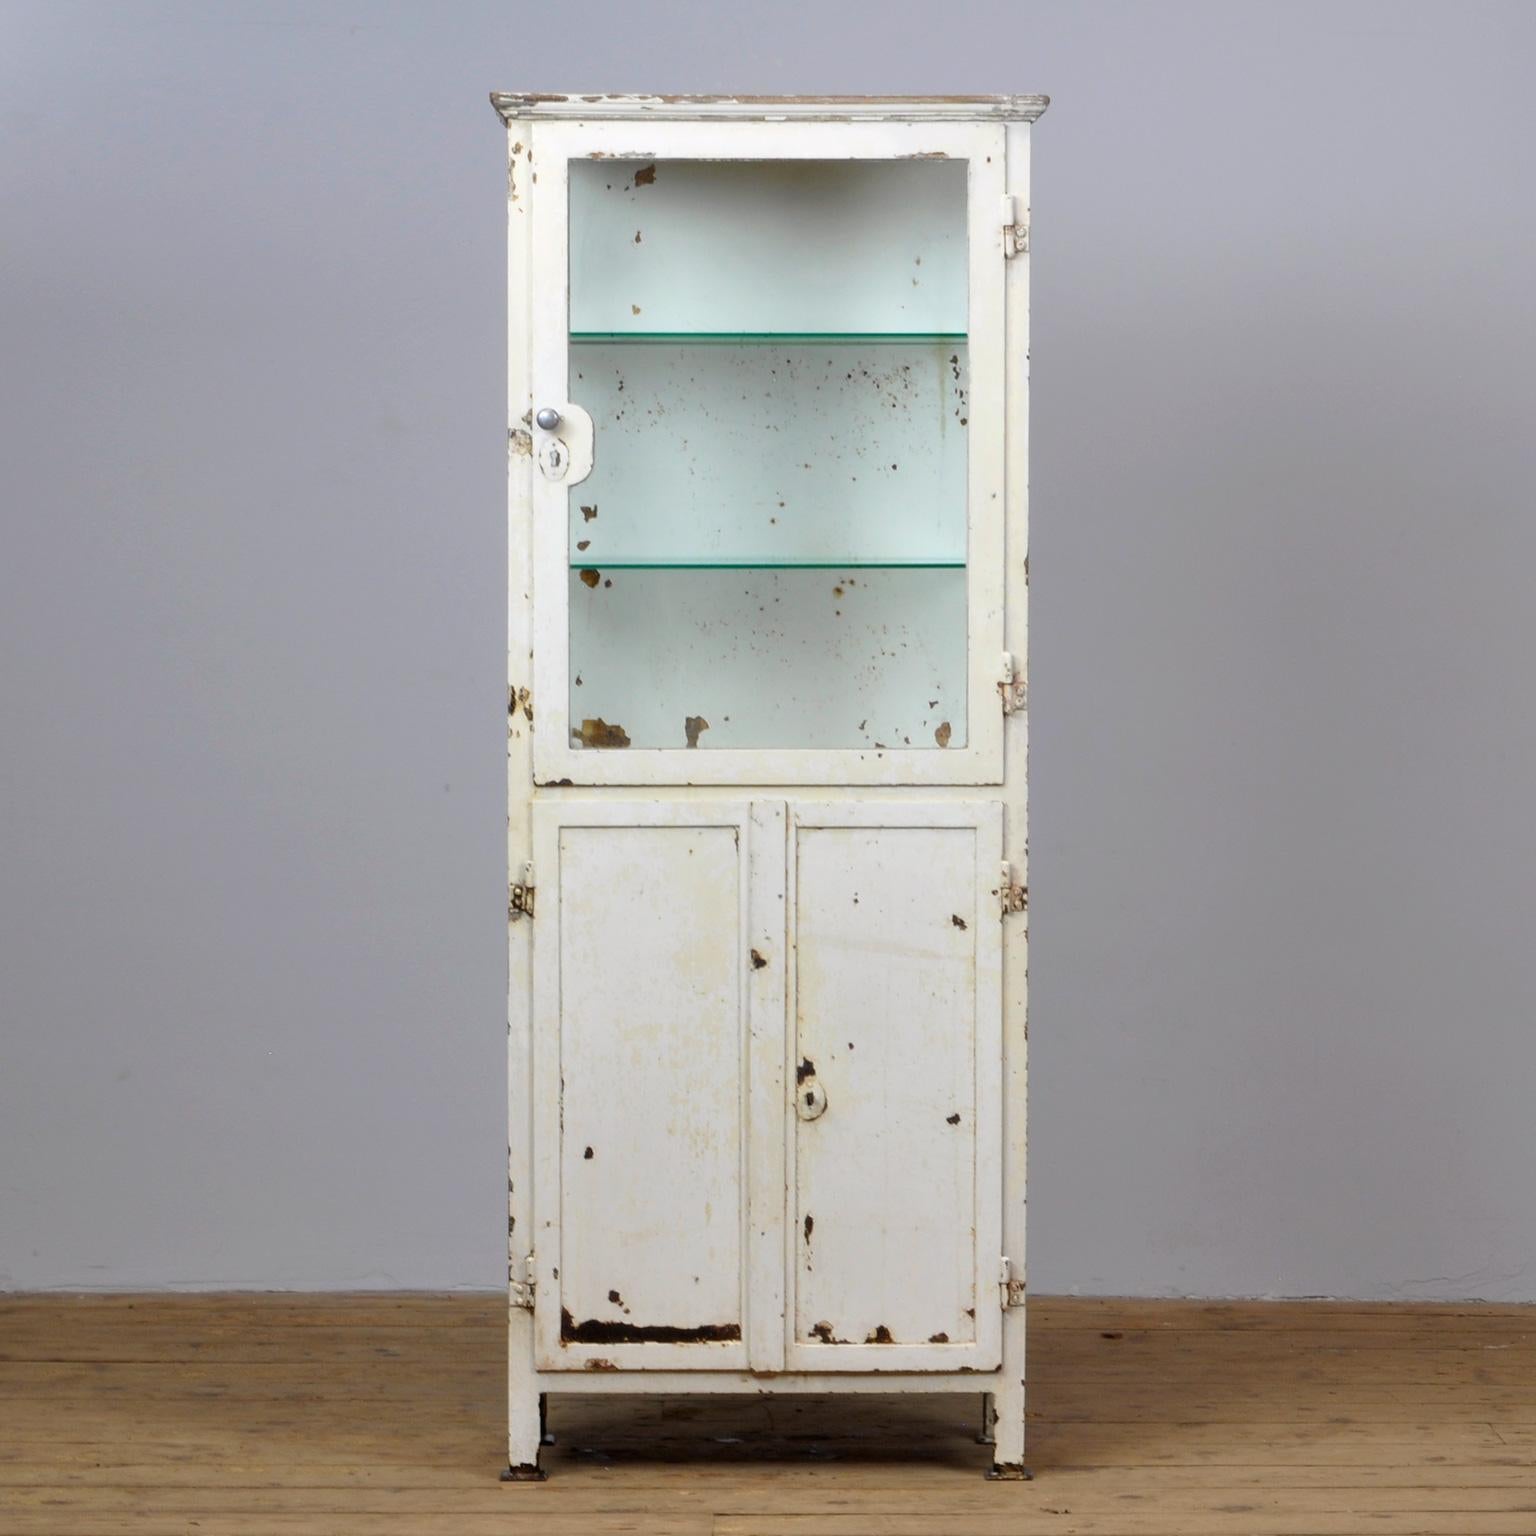 Medicine cabinet from the 1920s with a weathered appearance. Made from thick iron with an edge of wood on top. Lock of the upper door is missing but the door closes properly. Treated against rust.